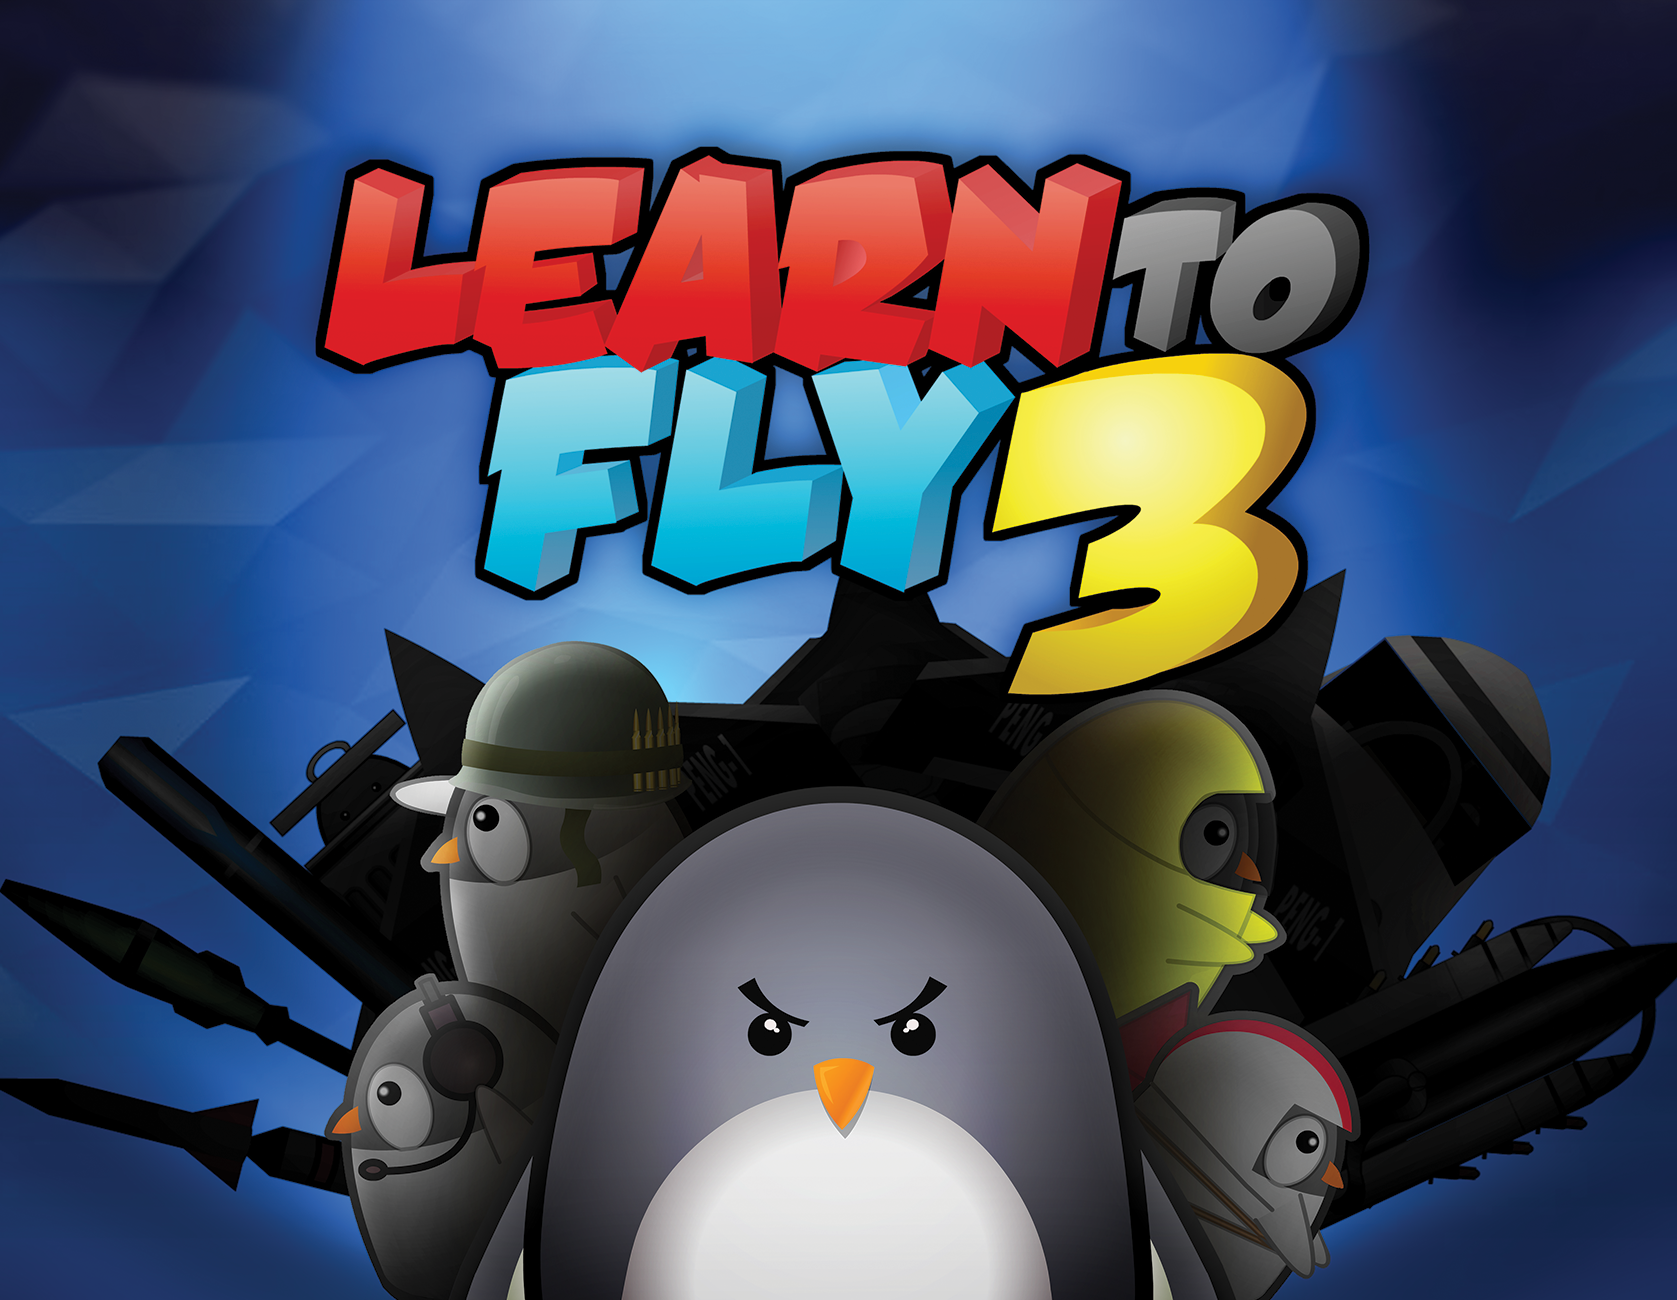 learn to fly 3 hacked learn to fly 3 hacked unblocked games